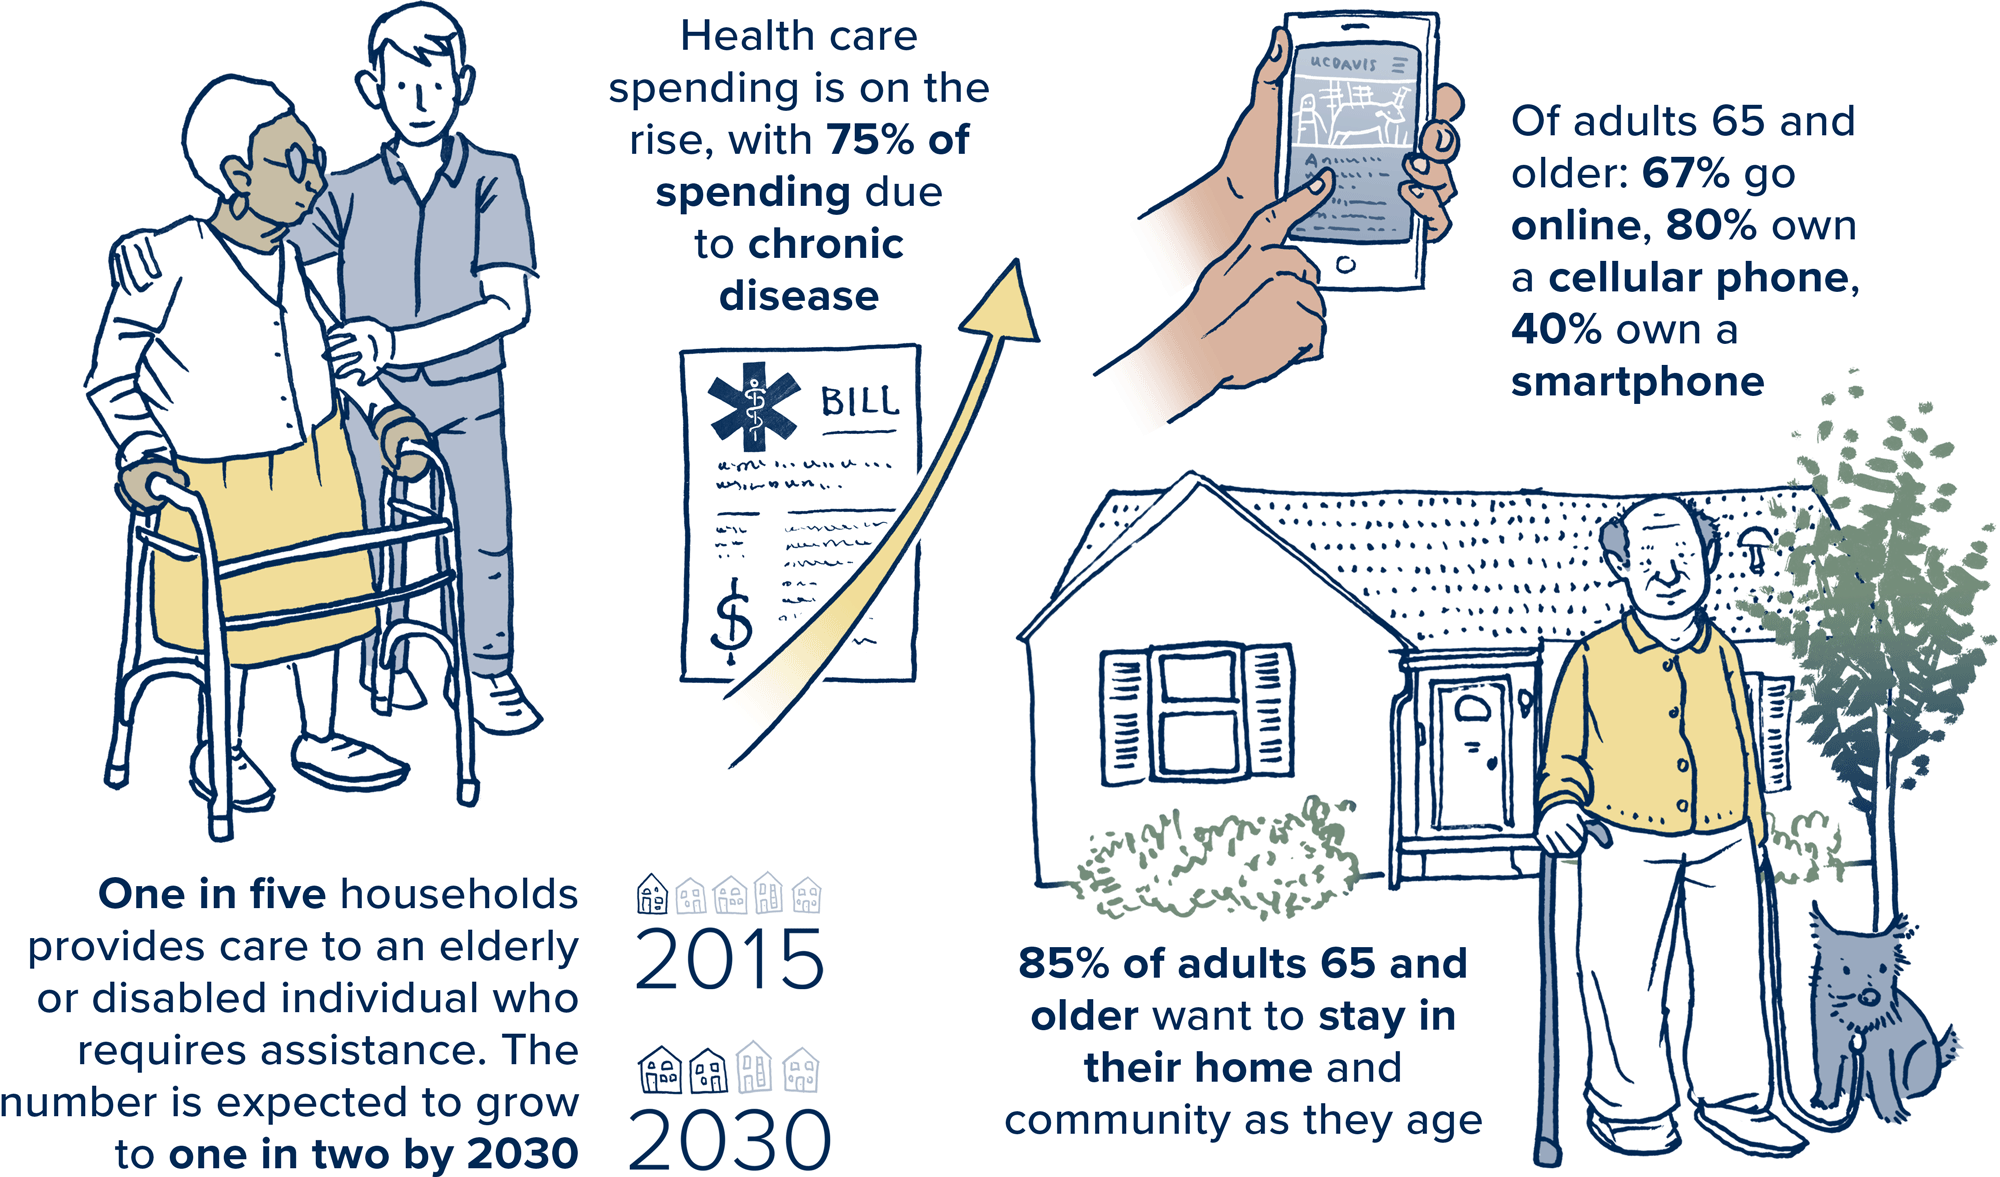 Aging statistics in the US and ways technology can be used for healthy aging, aging gracefully, and fall prevention.